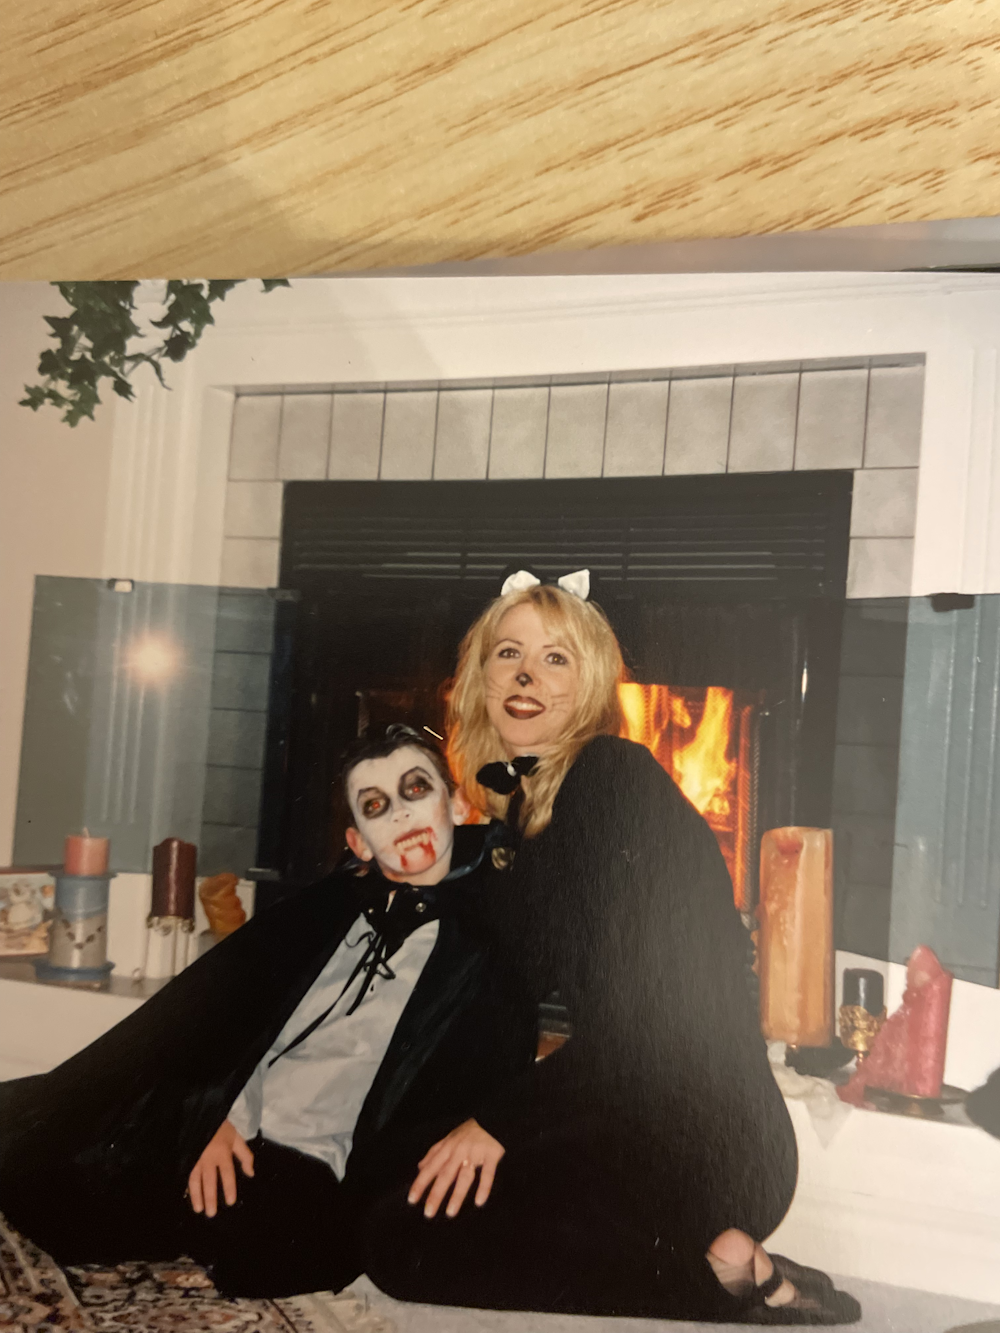 Yvette and her son Matthew on Halloween! Spooky vampire and crazy cat lady 🧛🏻‍♀️🎃🐯 